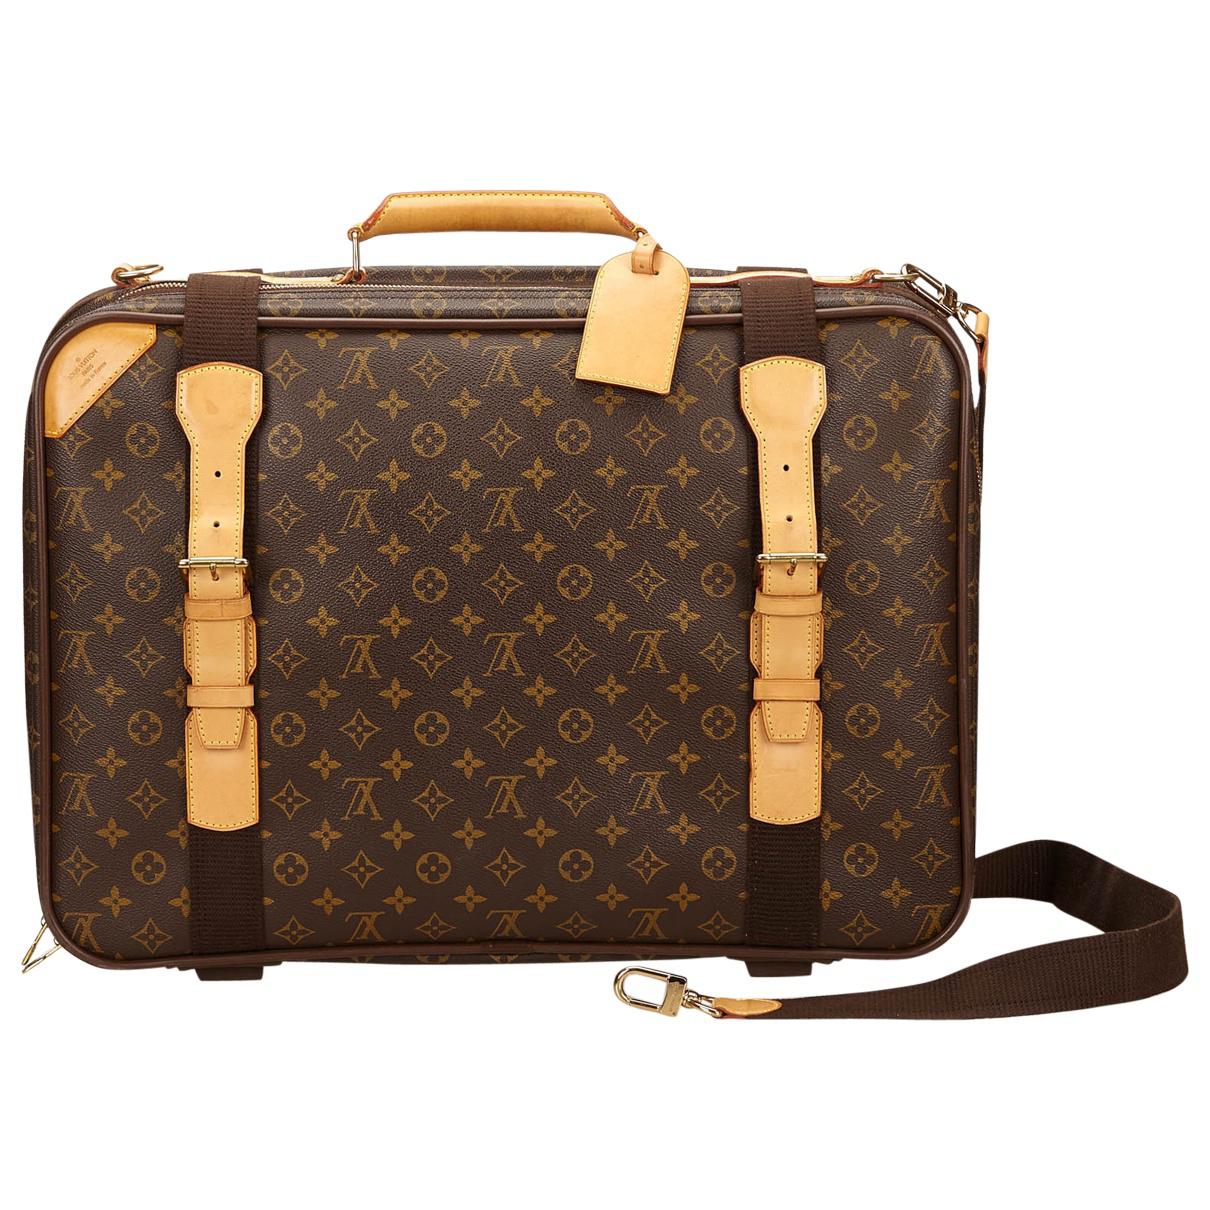 Lyst - Louis Vuitton Pre-owned Cloth Travel Bag in Brown